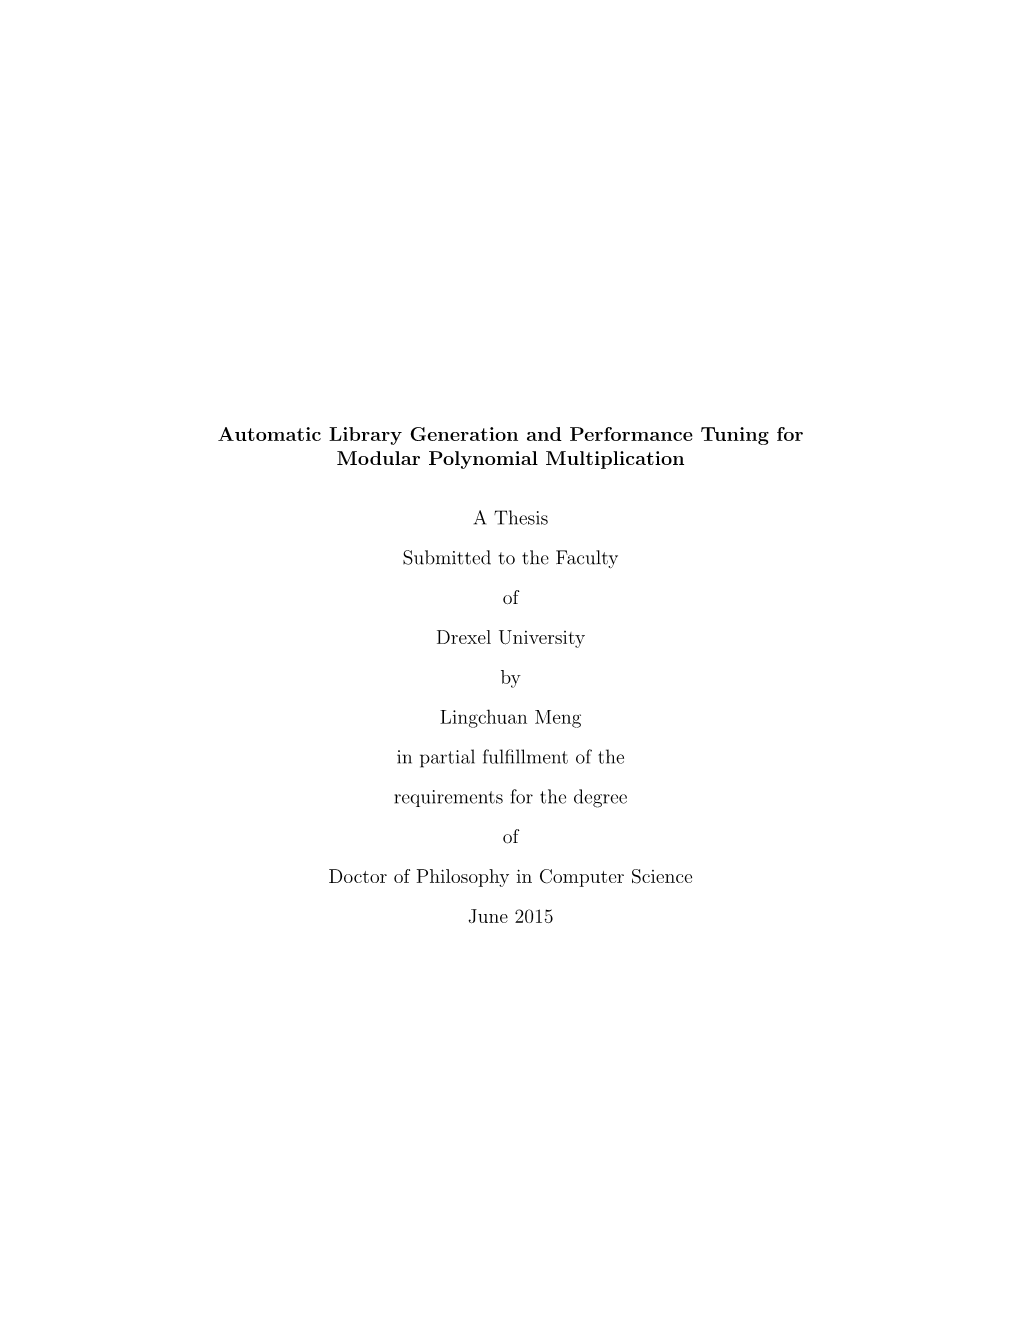 Automatic Library Generation and Performance Tuning for Modular Polynomial Multiplication a Thesis Submitted to the Faculty of D